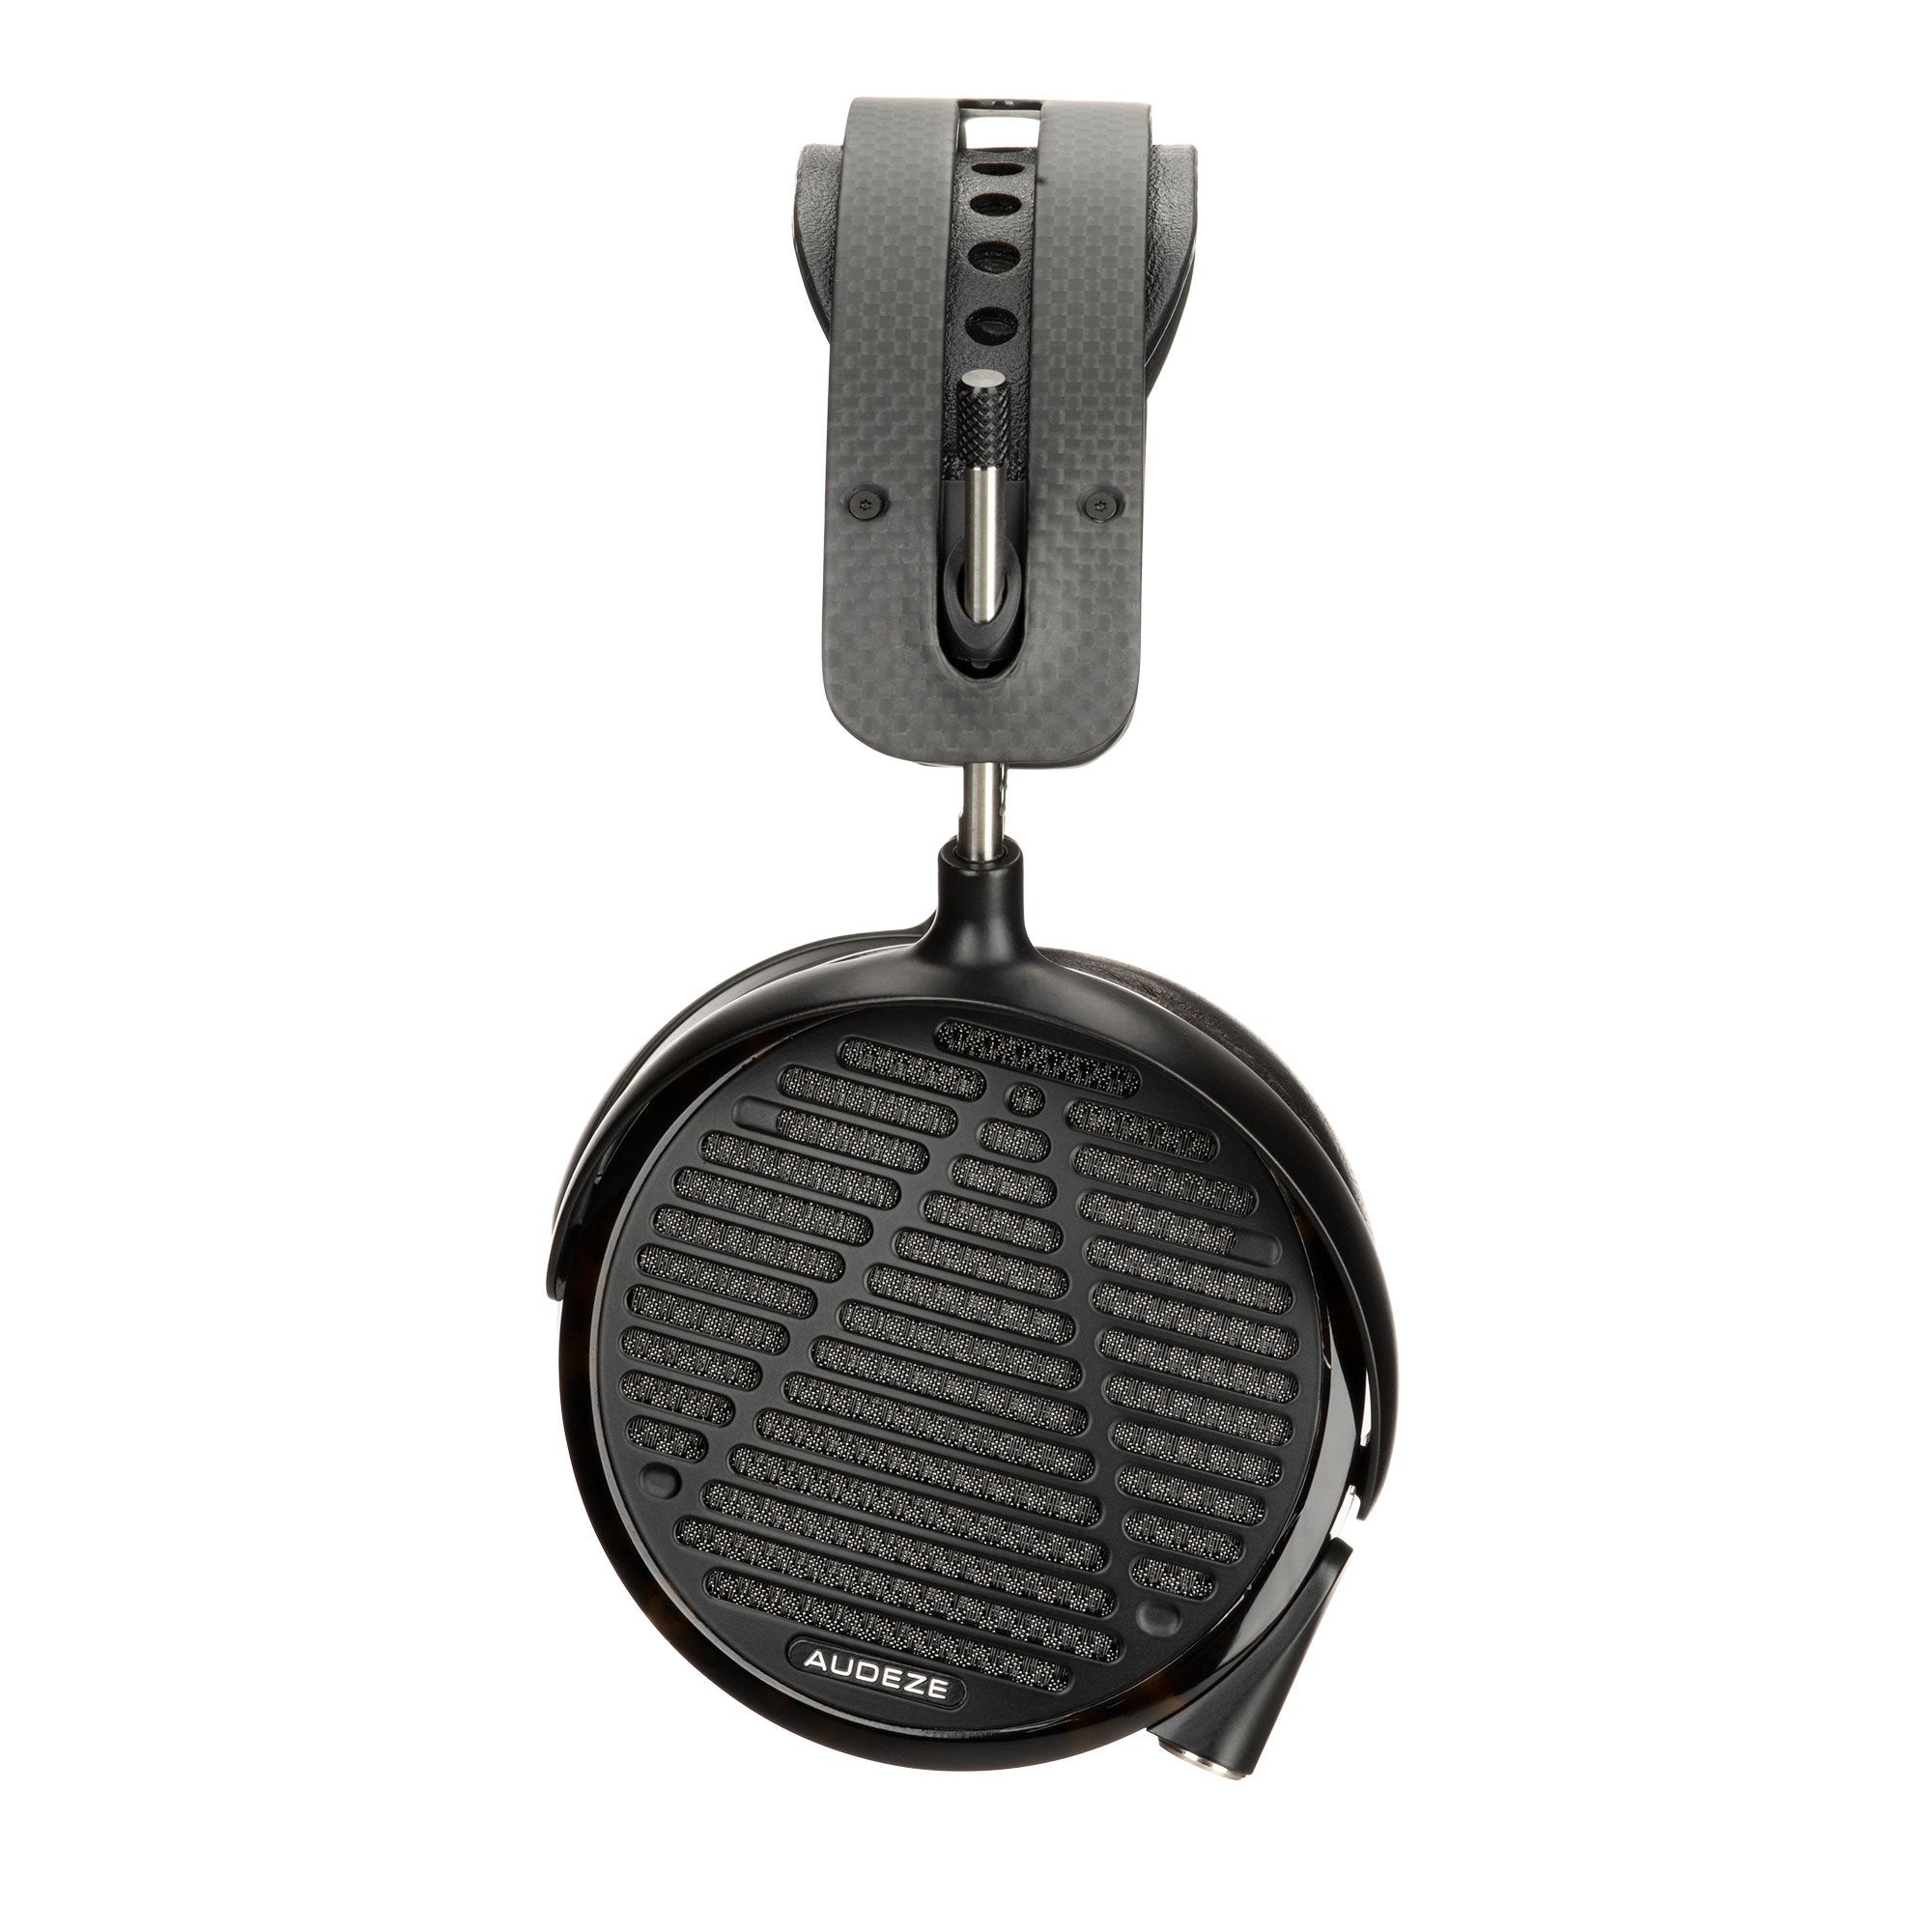 Audeze LCD-5 Open-Backed Headphones B-STOCK SALE! (available to demo)